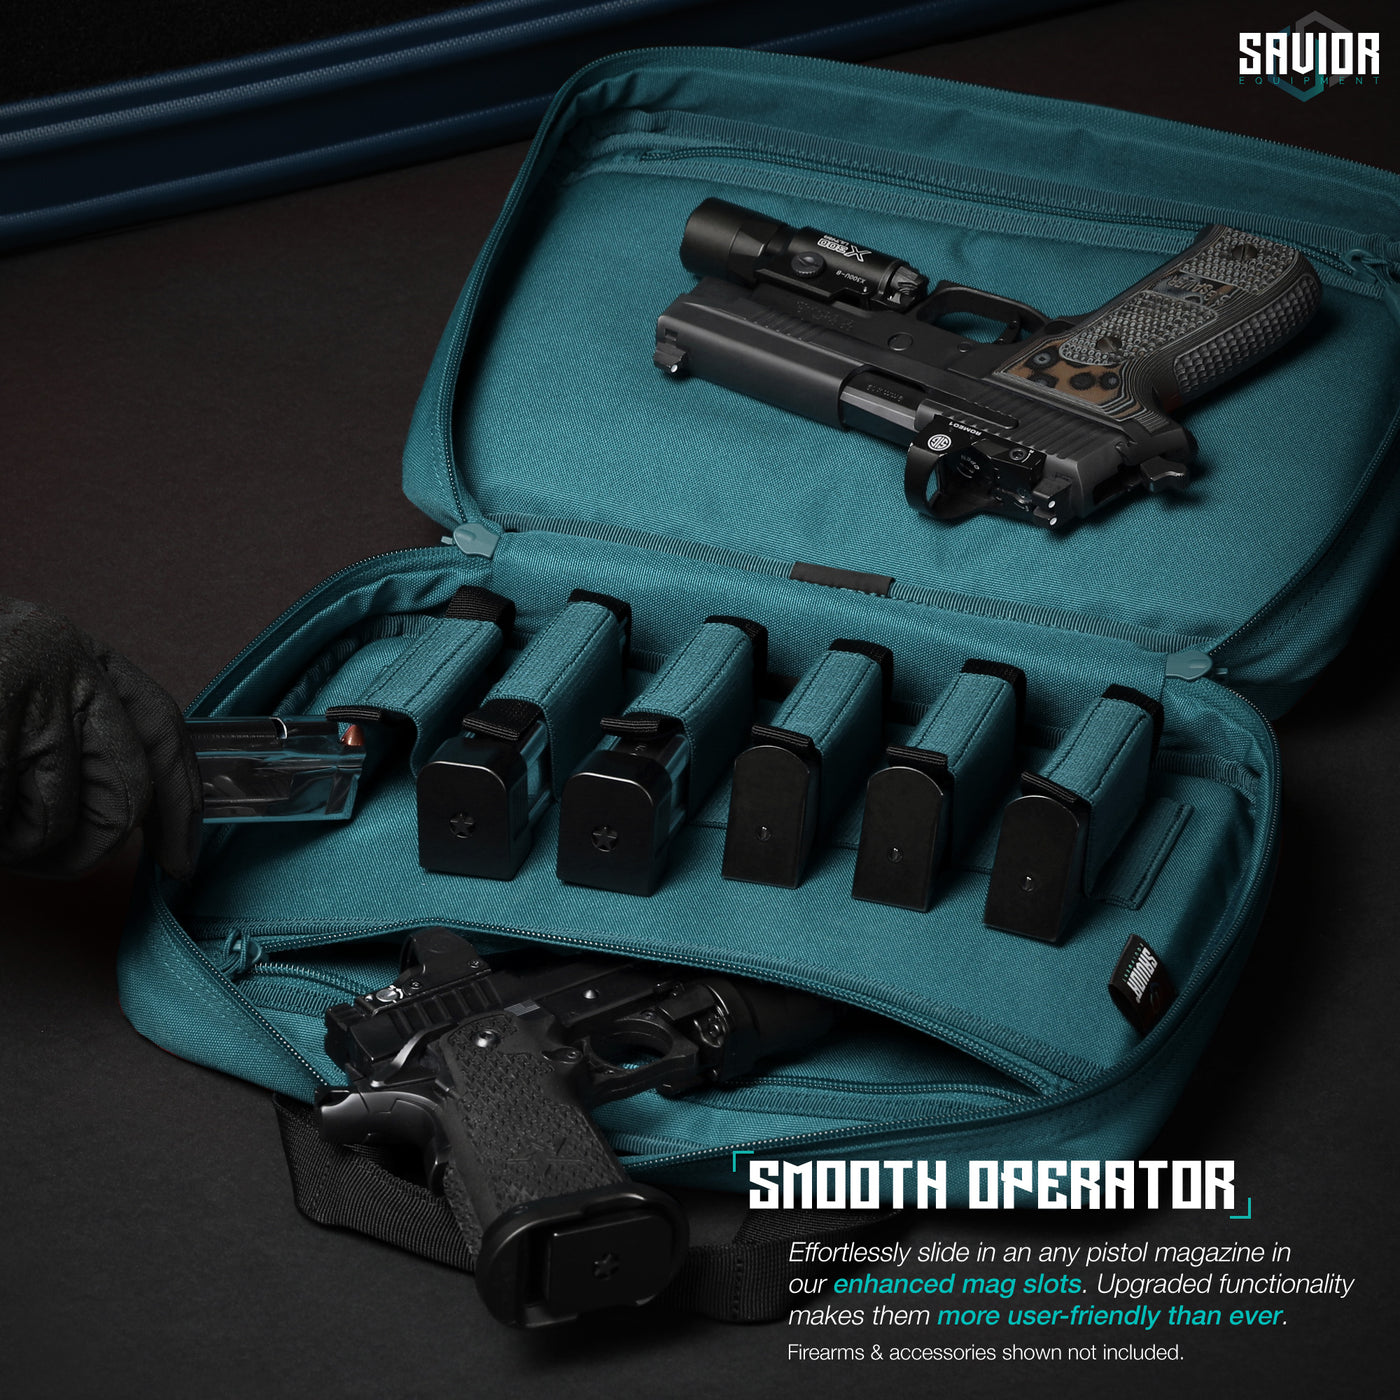 Smooth Operator - Effortlessly slide in an any pistol magazine in our enhanced mag slots. Upgraded functionality makes them more user-friendly than ever. Firearms & accessories shown not included.